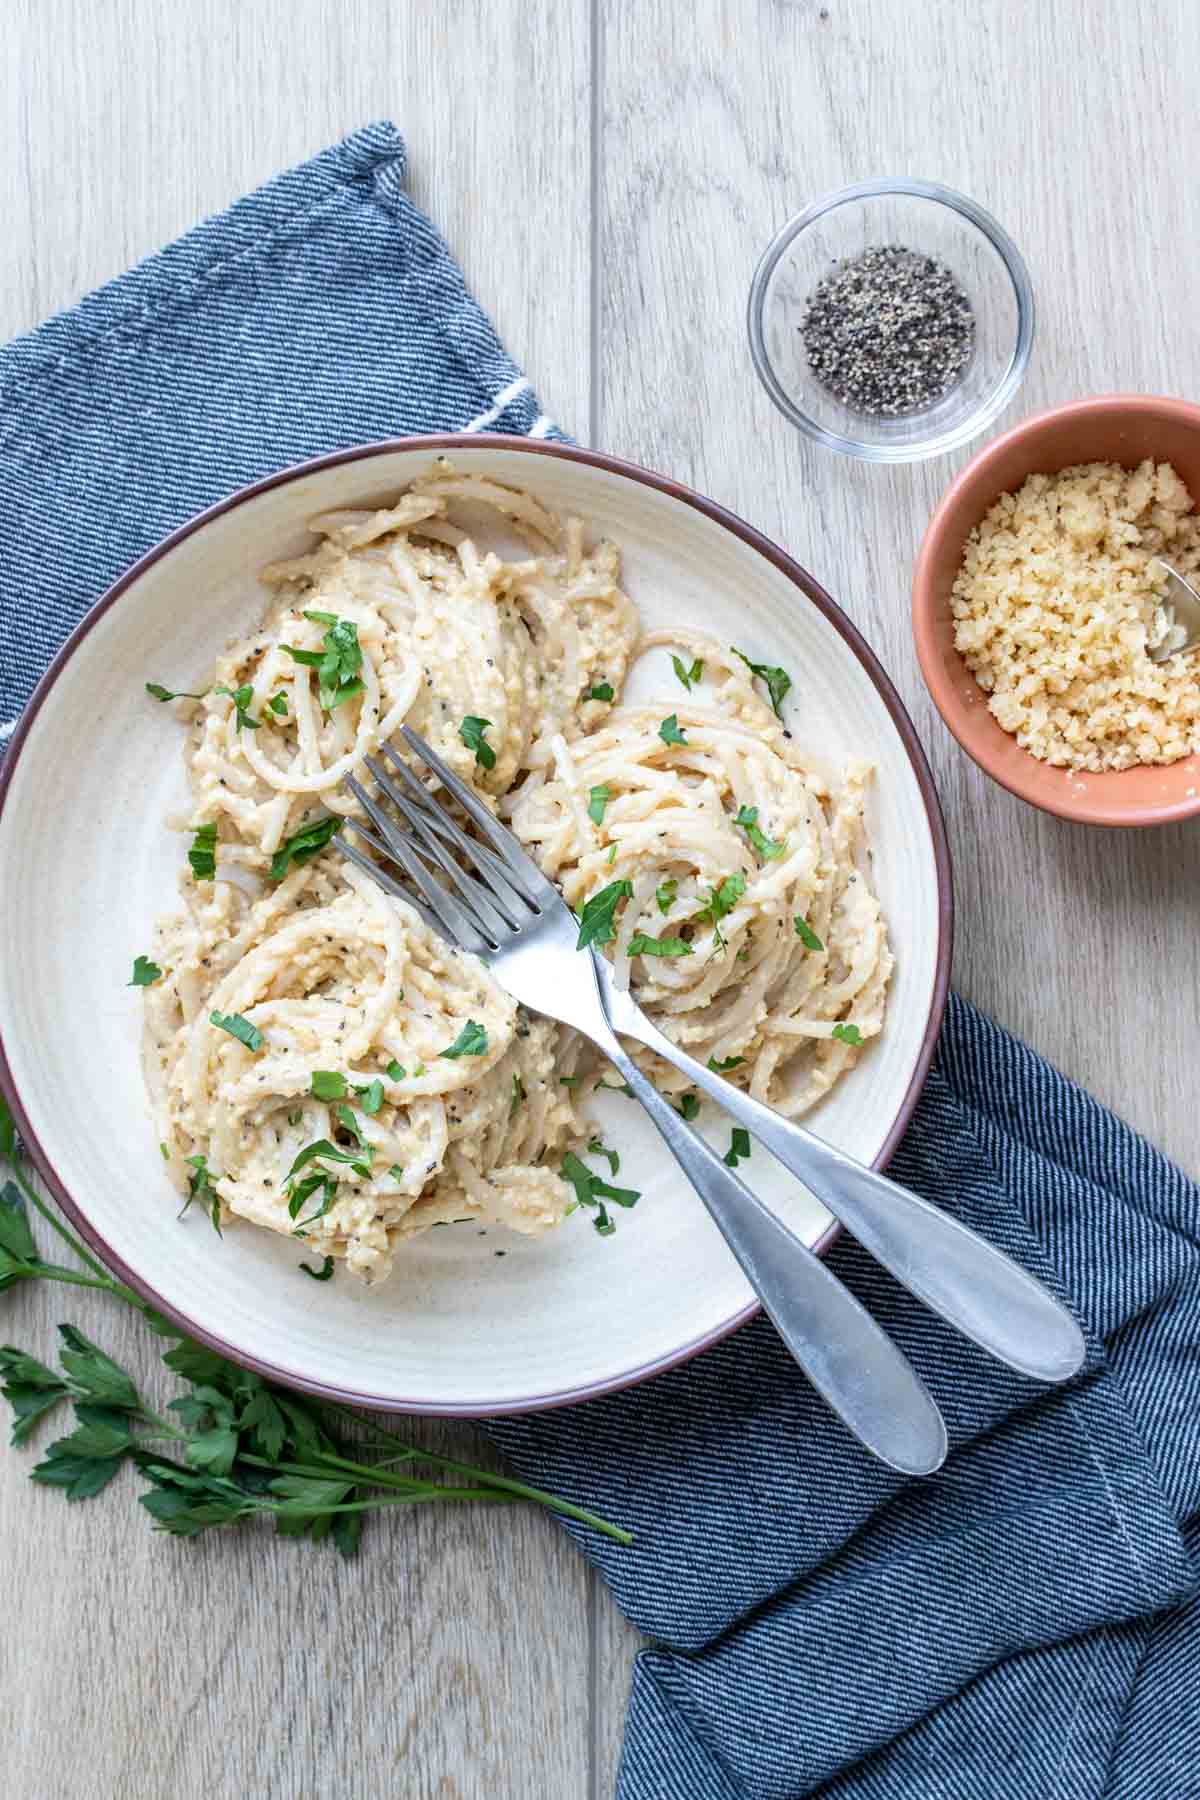 A cream colored plate with three twirled piles of spaghetti in a creamy sauce